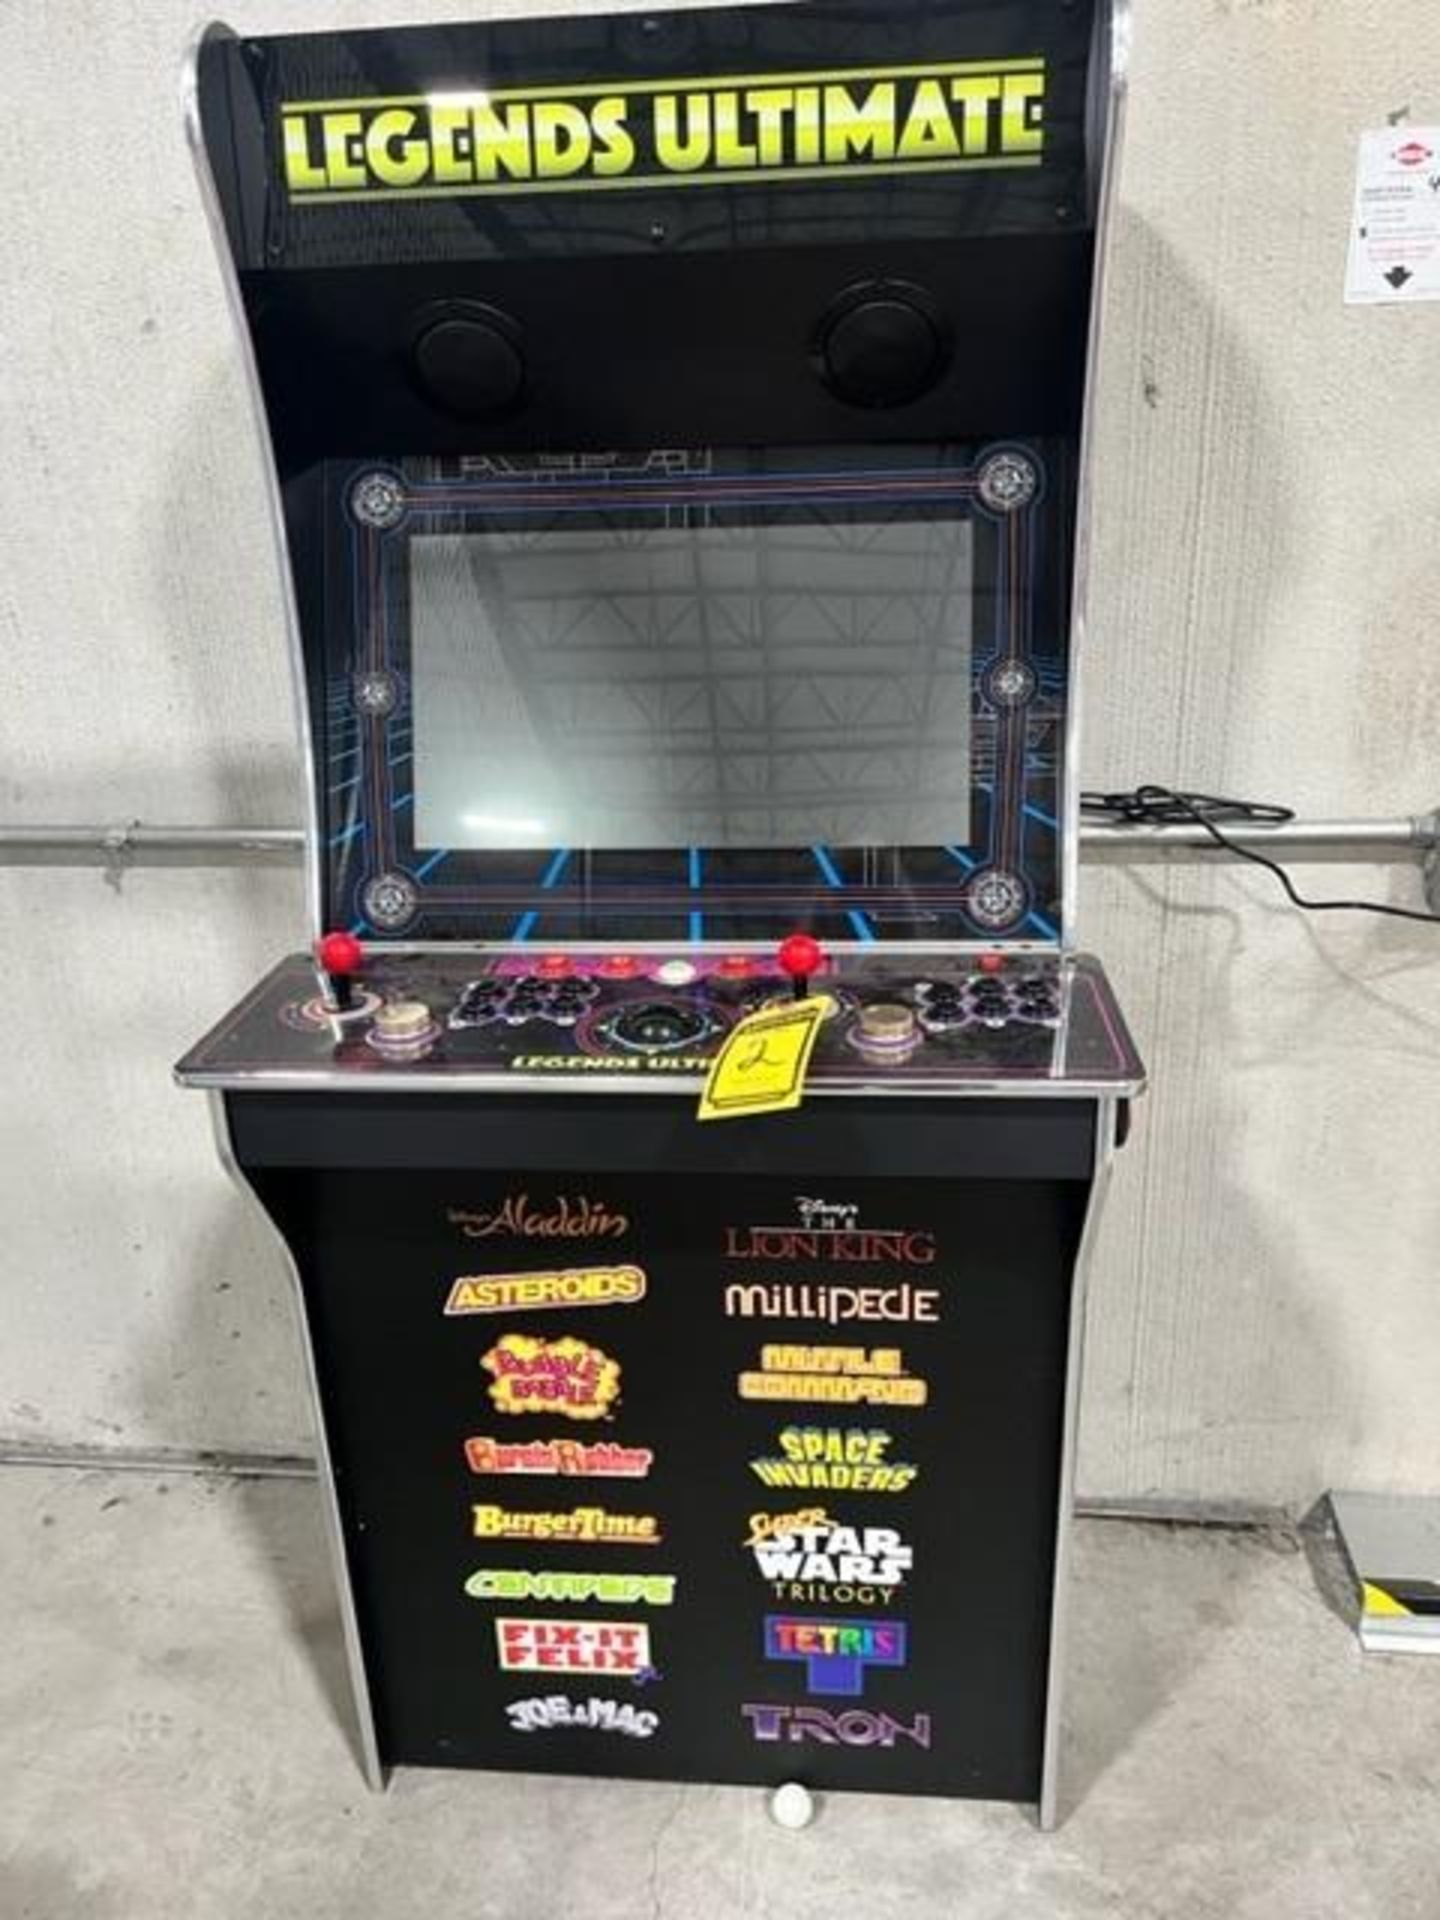 Legends Ultimate Arcade Game ($25 Loading Fee Will Be Added To Invoice)